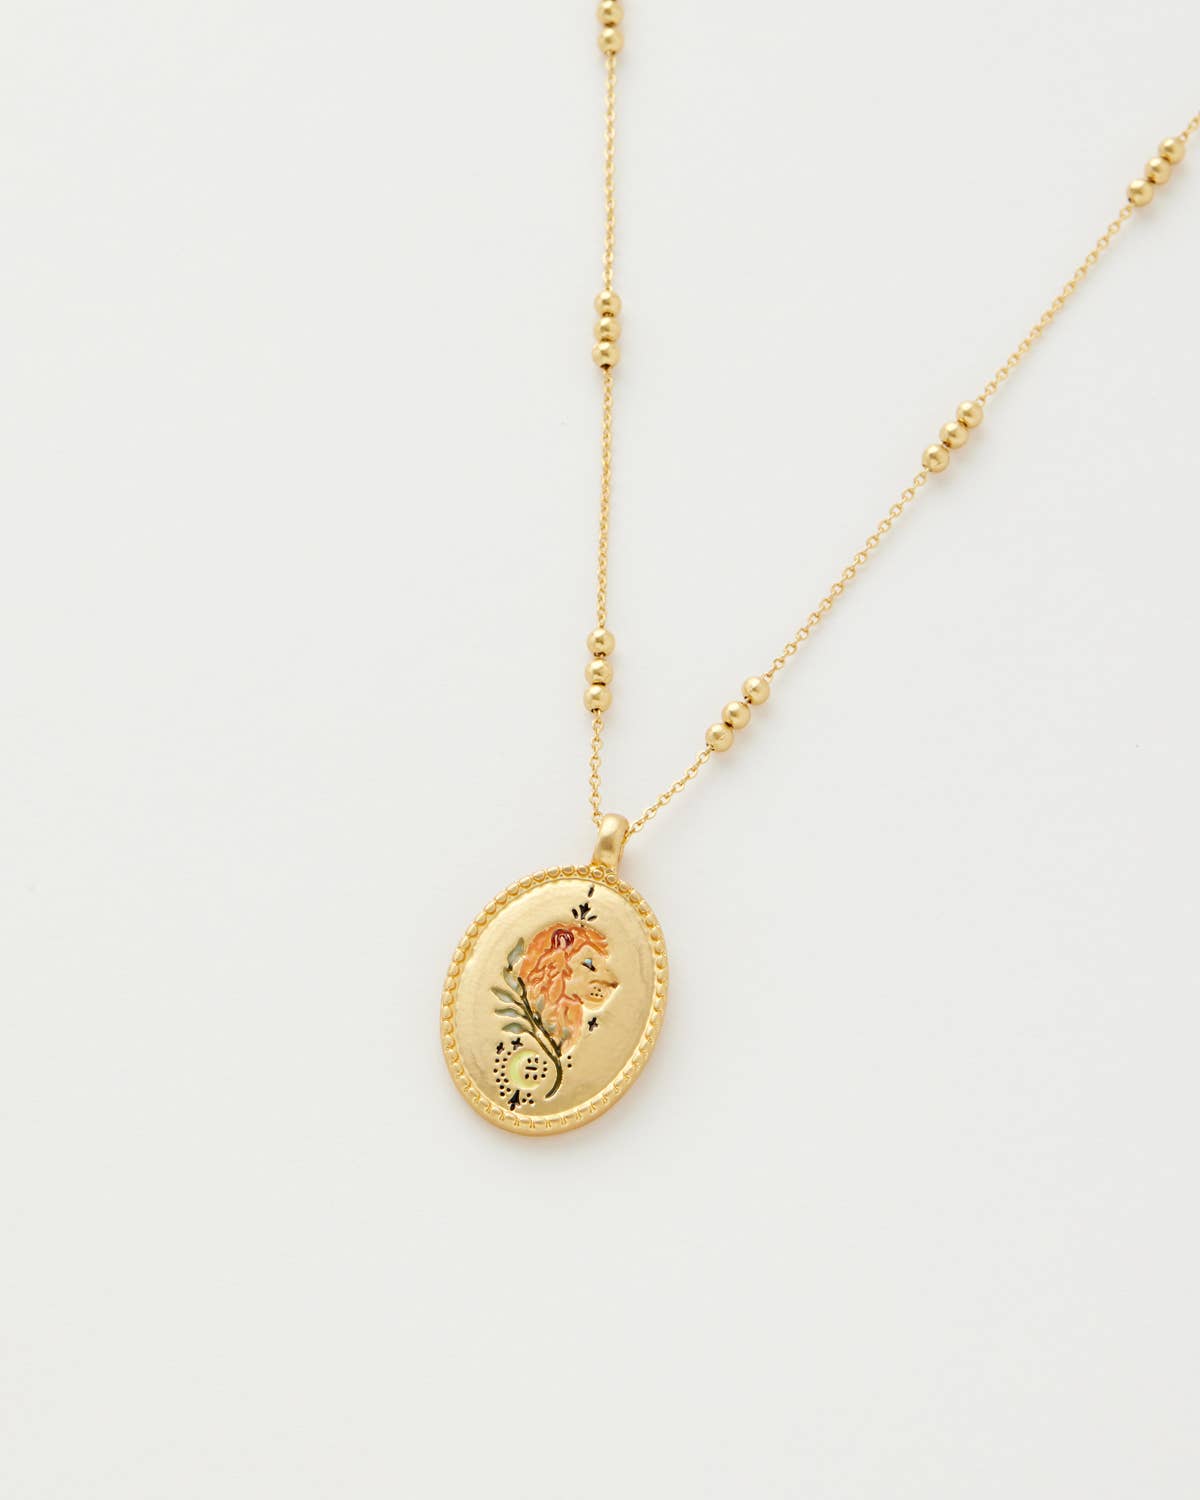 Zodiac Necklace - Leo - Out of the Blue